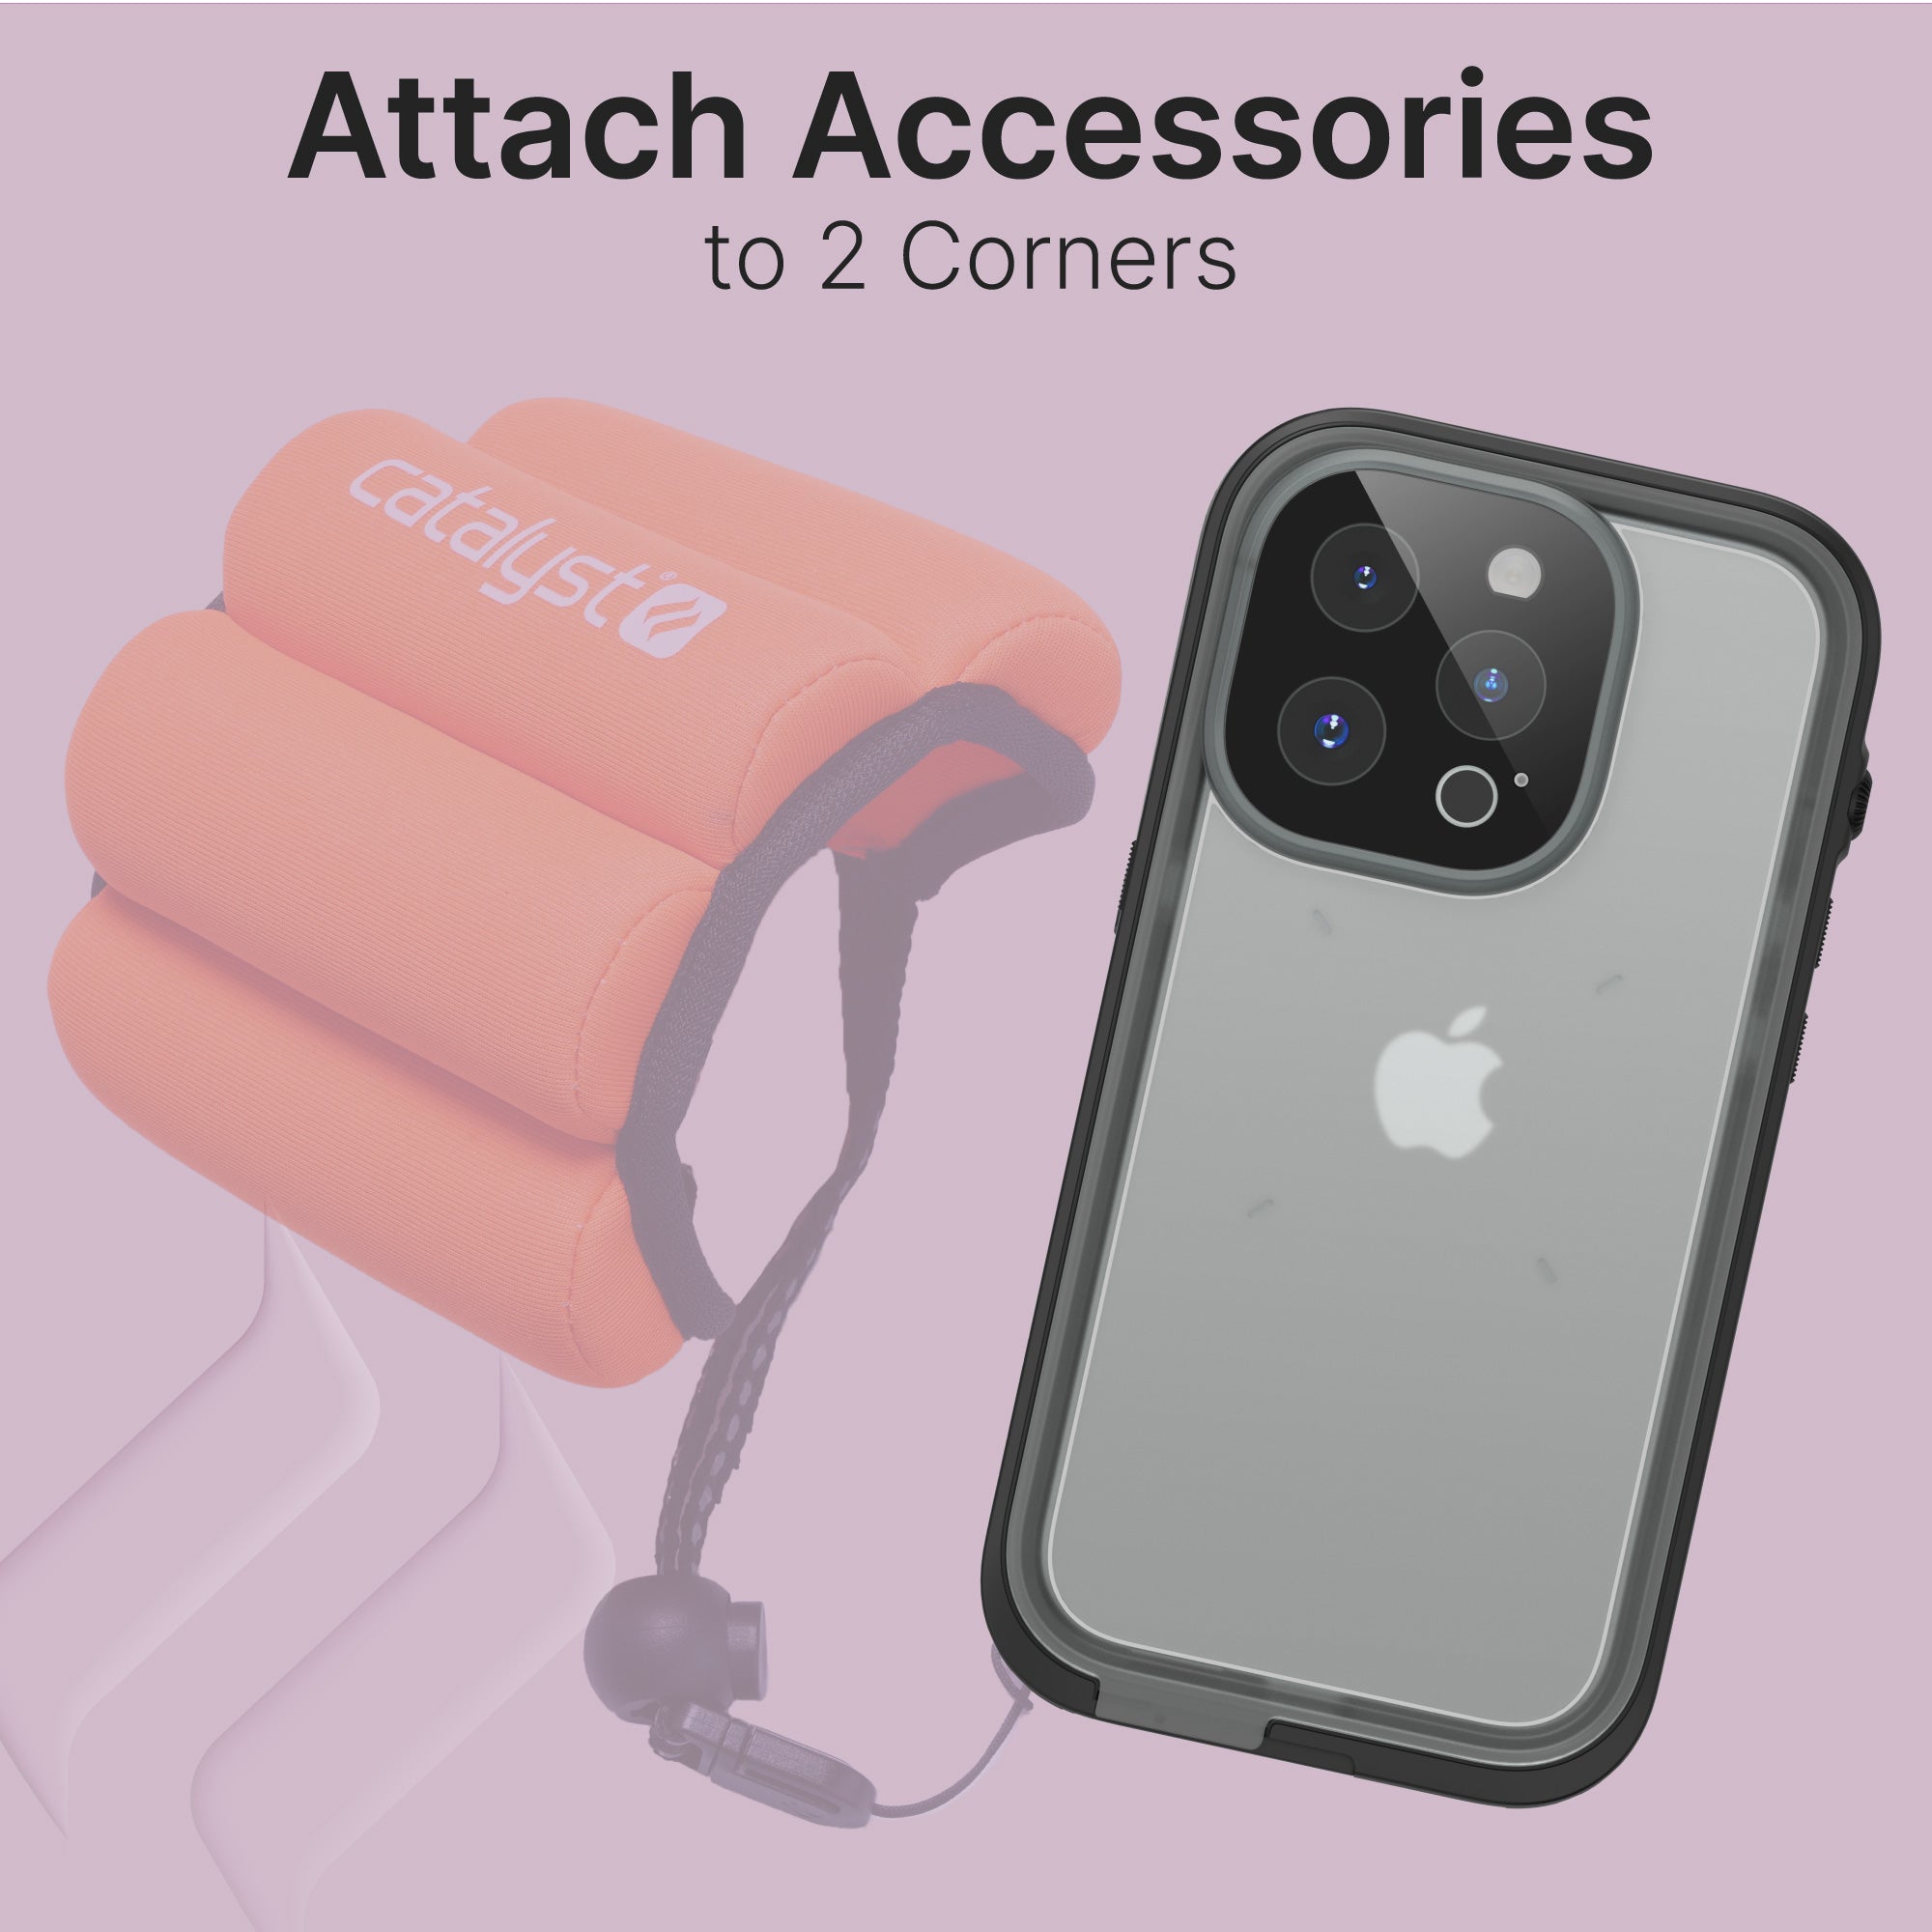 CATIPHO14BLKM-FBA | Catalyst iPhone 14 Waterproof Case Total Protection Floating Wrist Lanyard attached to one of the 2 corners of case